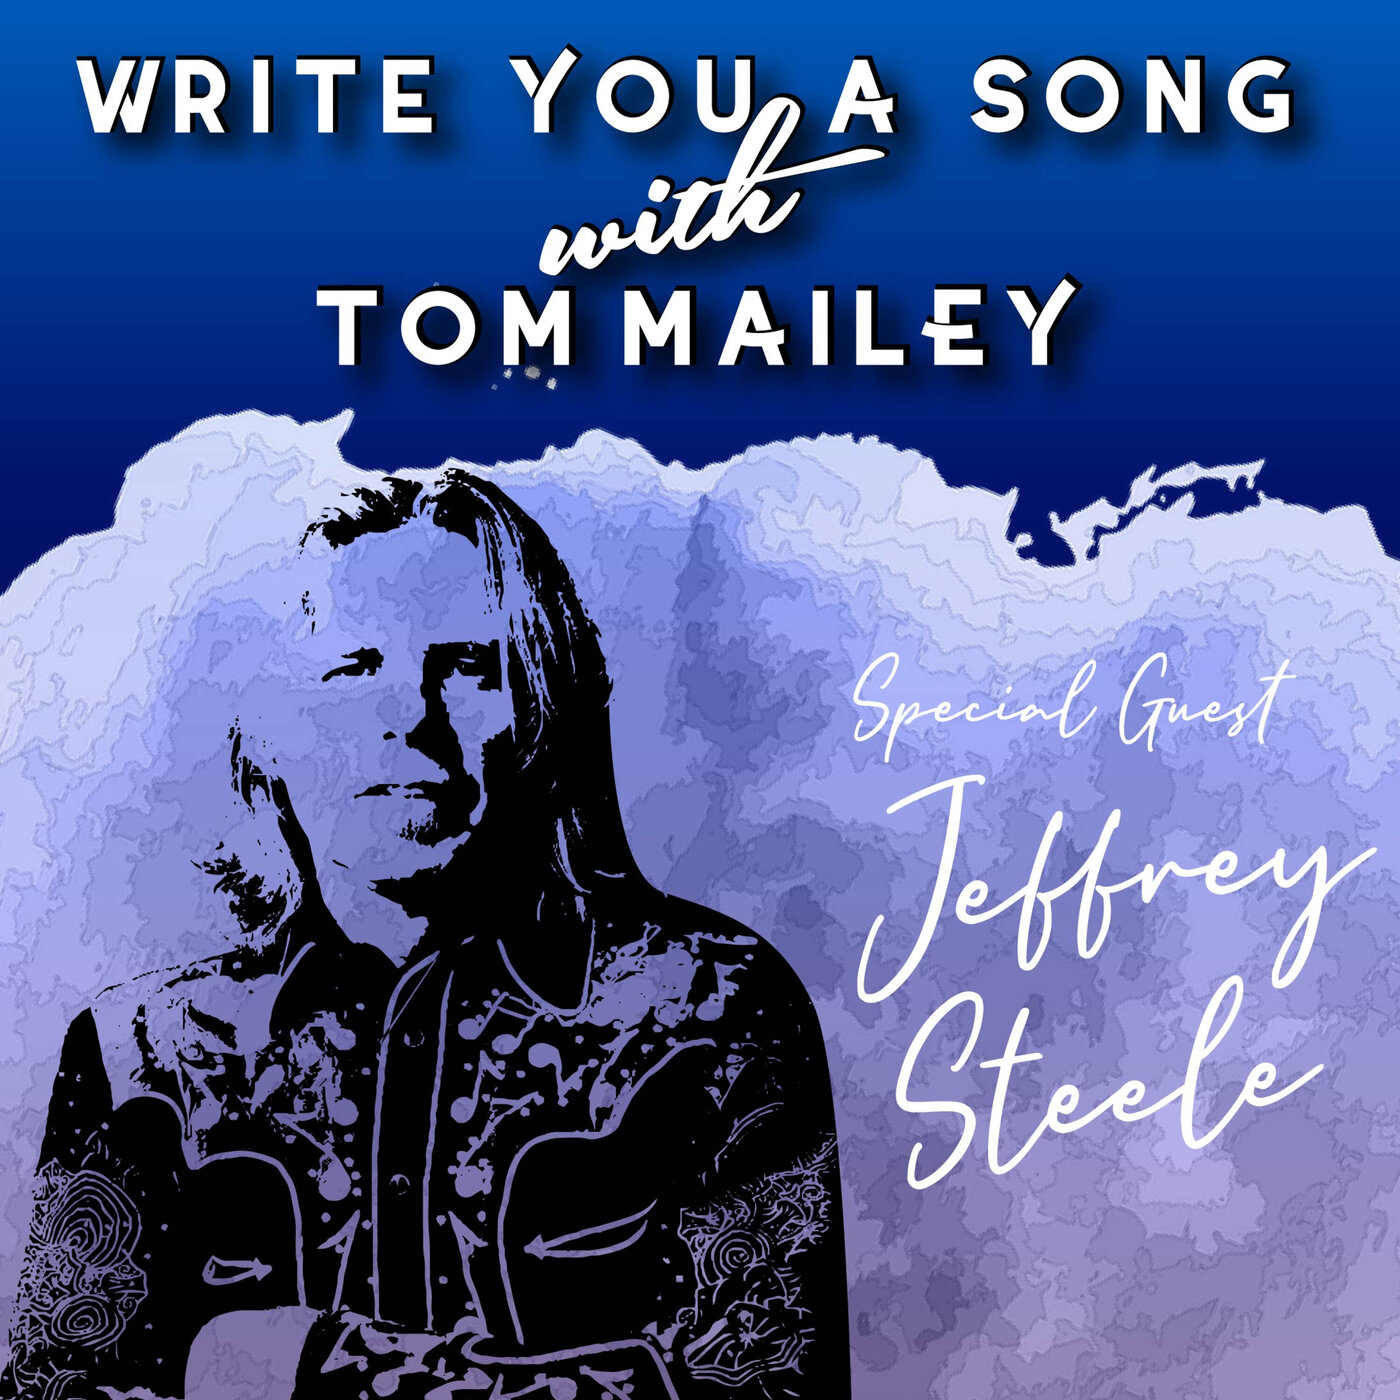 Write You A Song Episode 2 with guest Jeffrey Steele